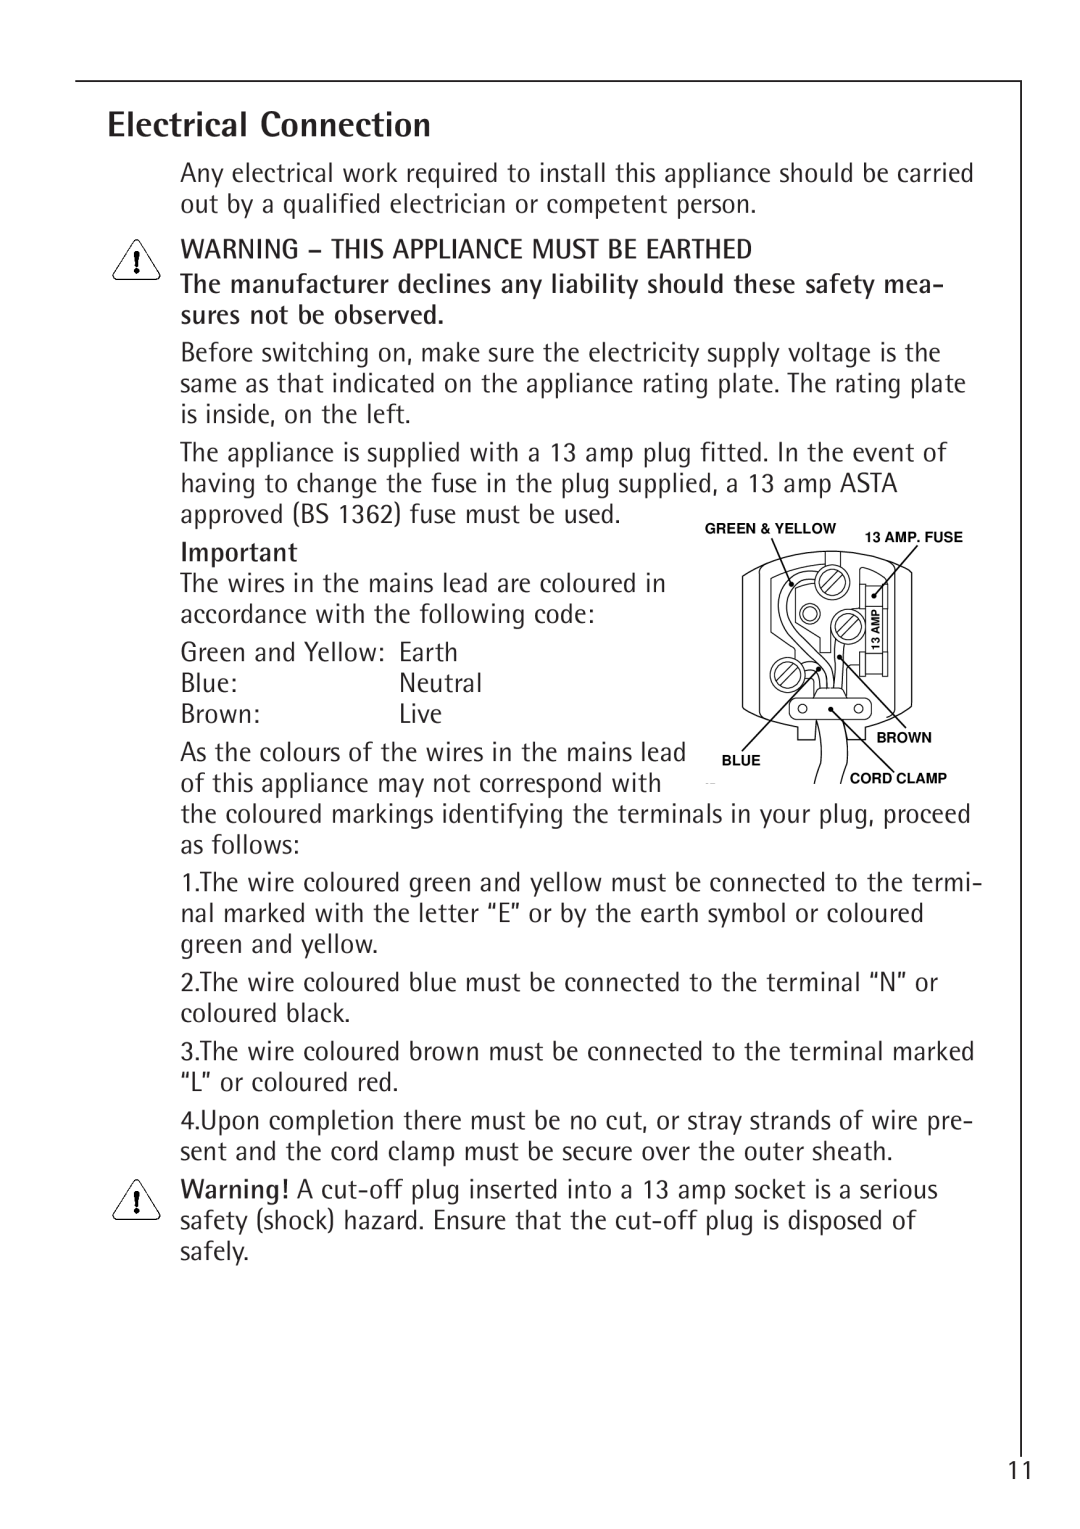 AEG 1450-7 TK manual Electrical Connection, Warning - This Appliance Must Be Earthed 